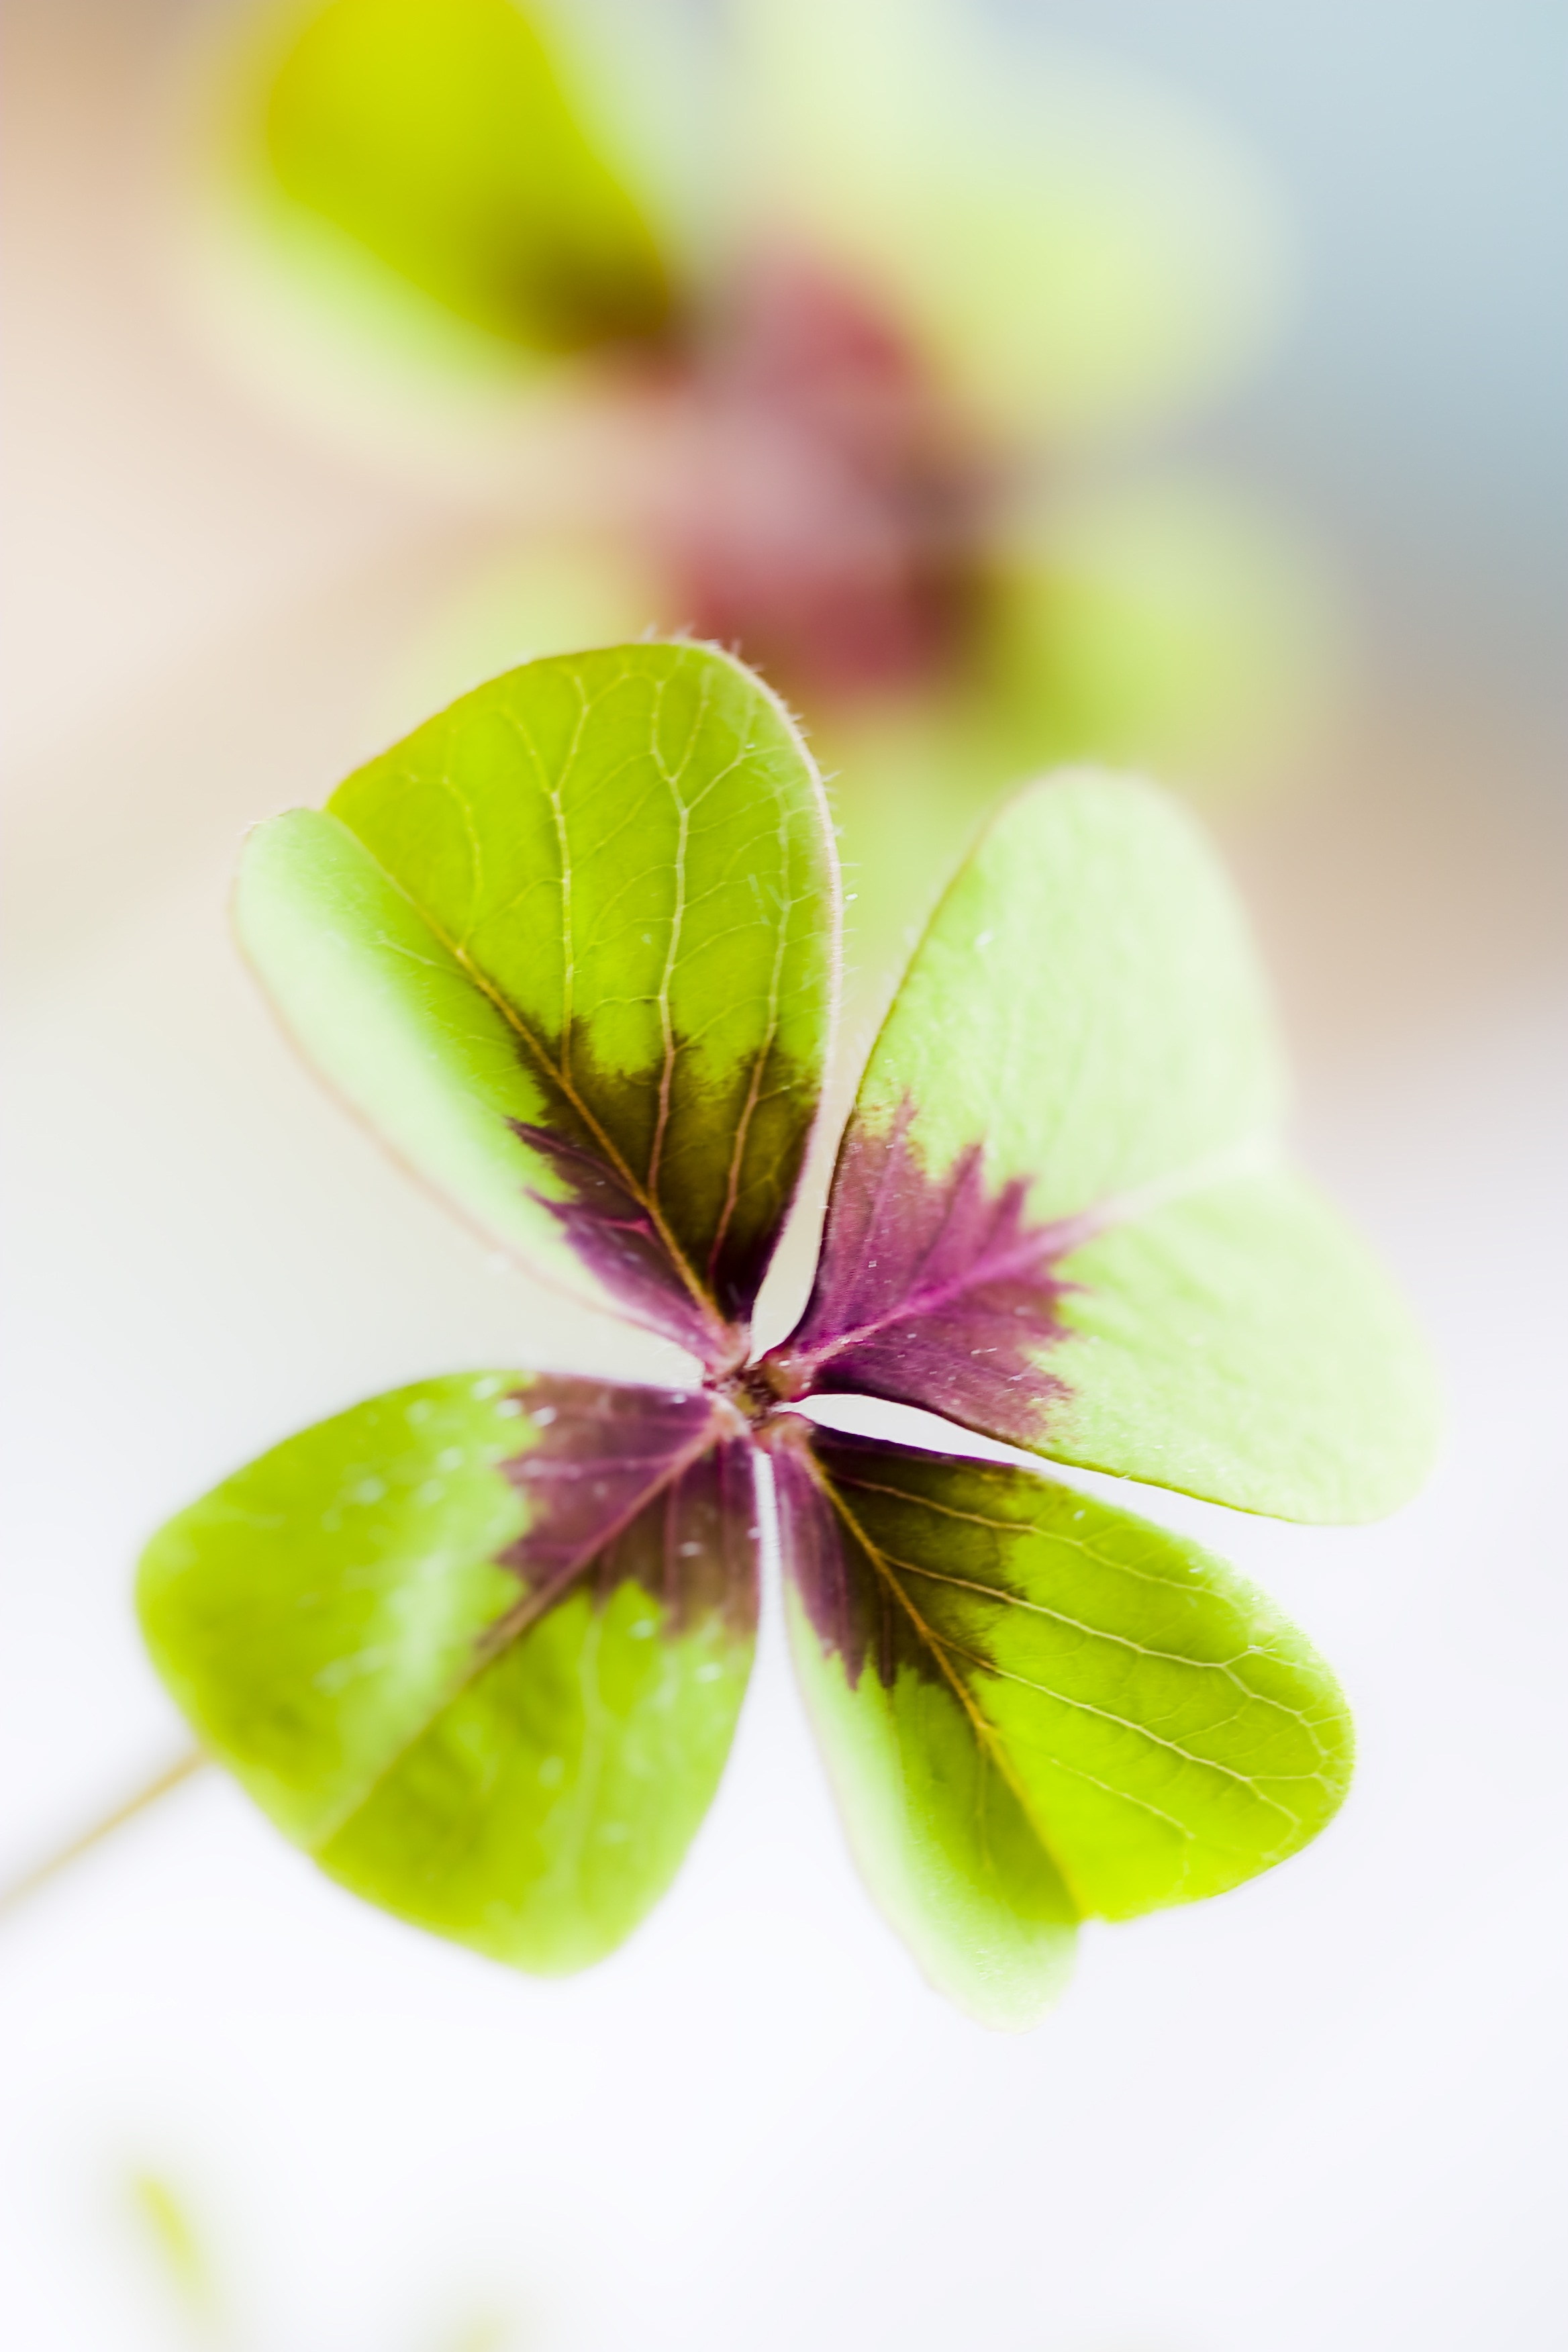 Four Leaf Flower With Purple And Green Leaf - HD Wallpaper 